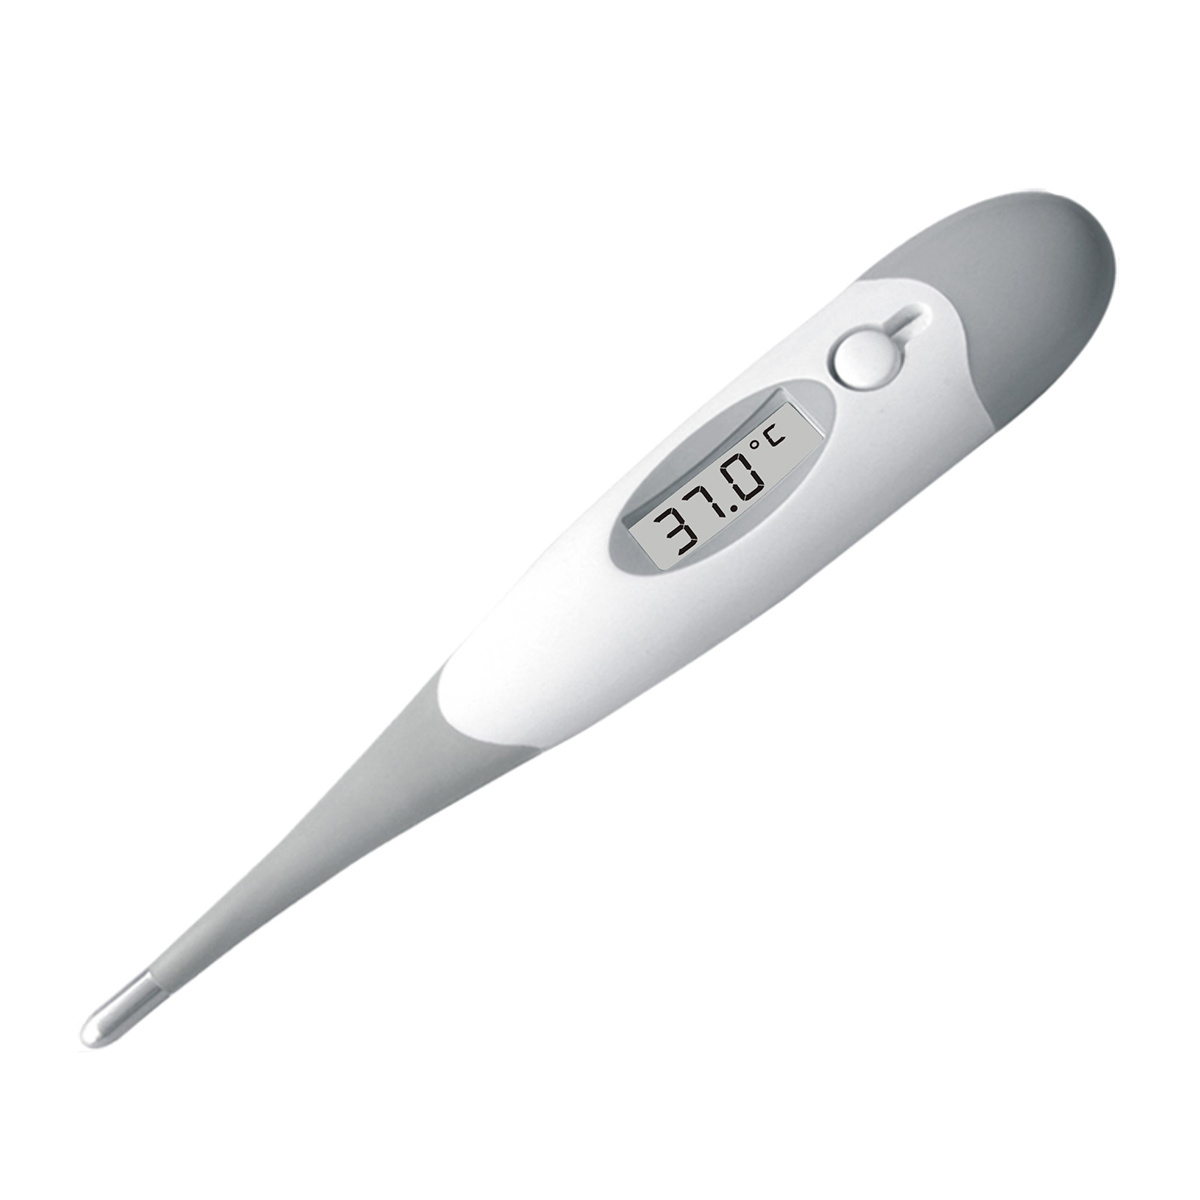 Digital thermometer The Best